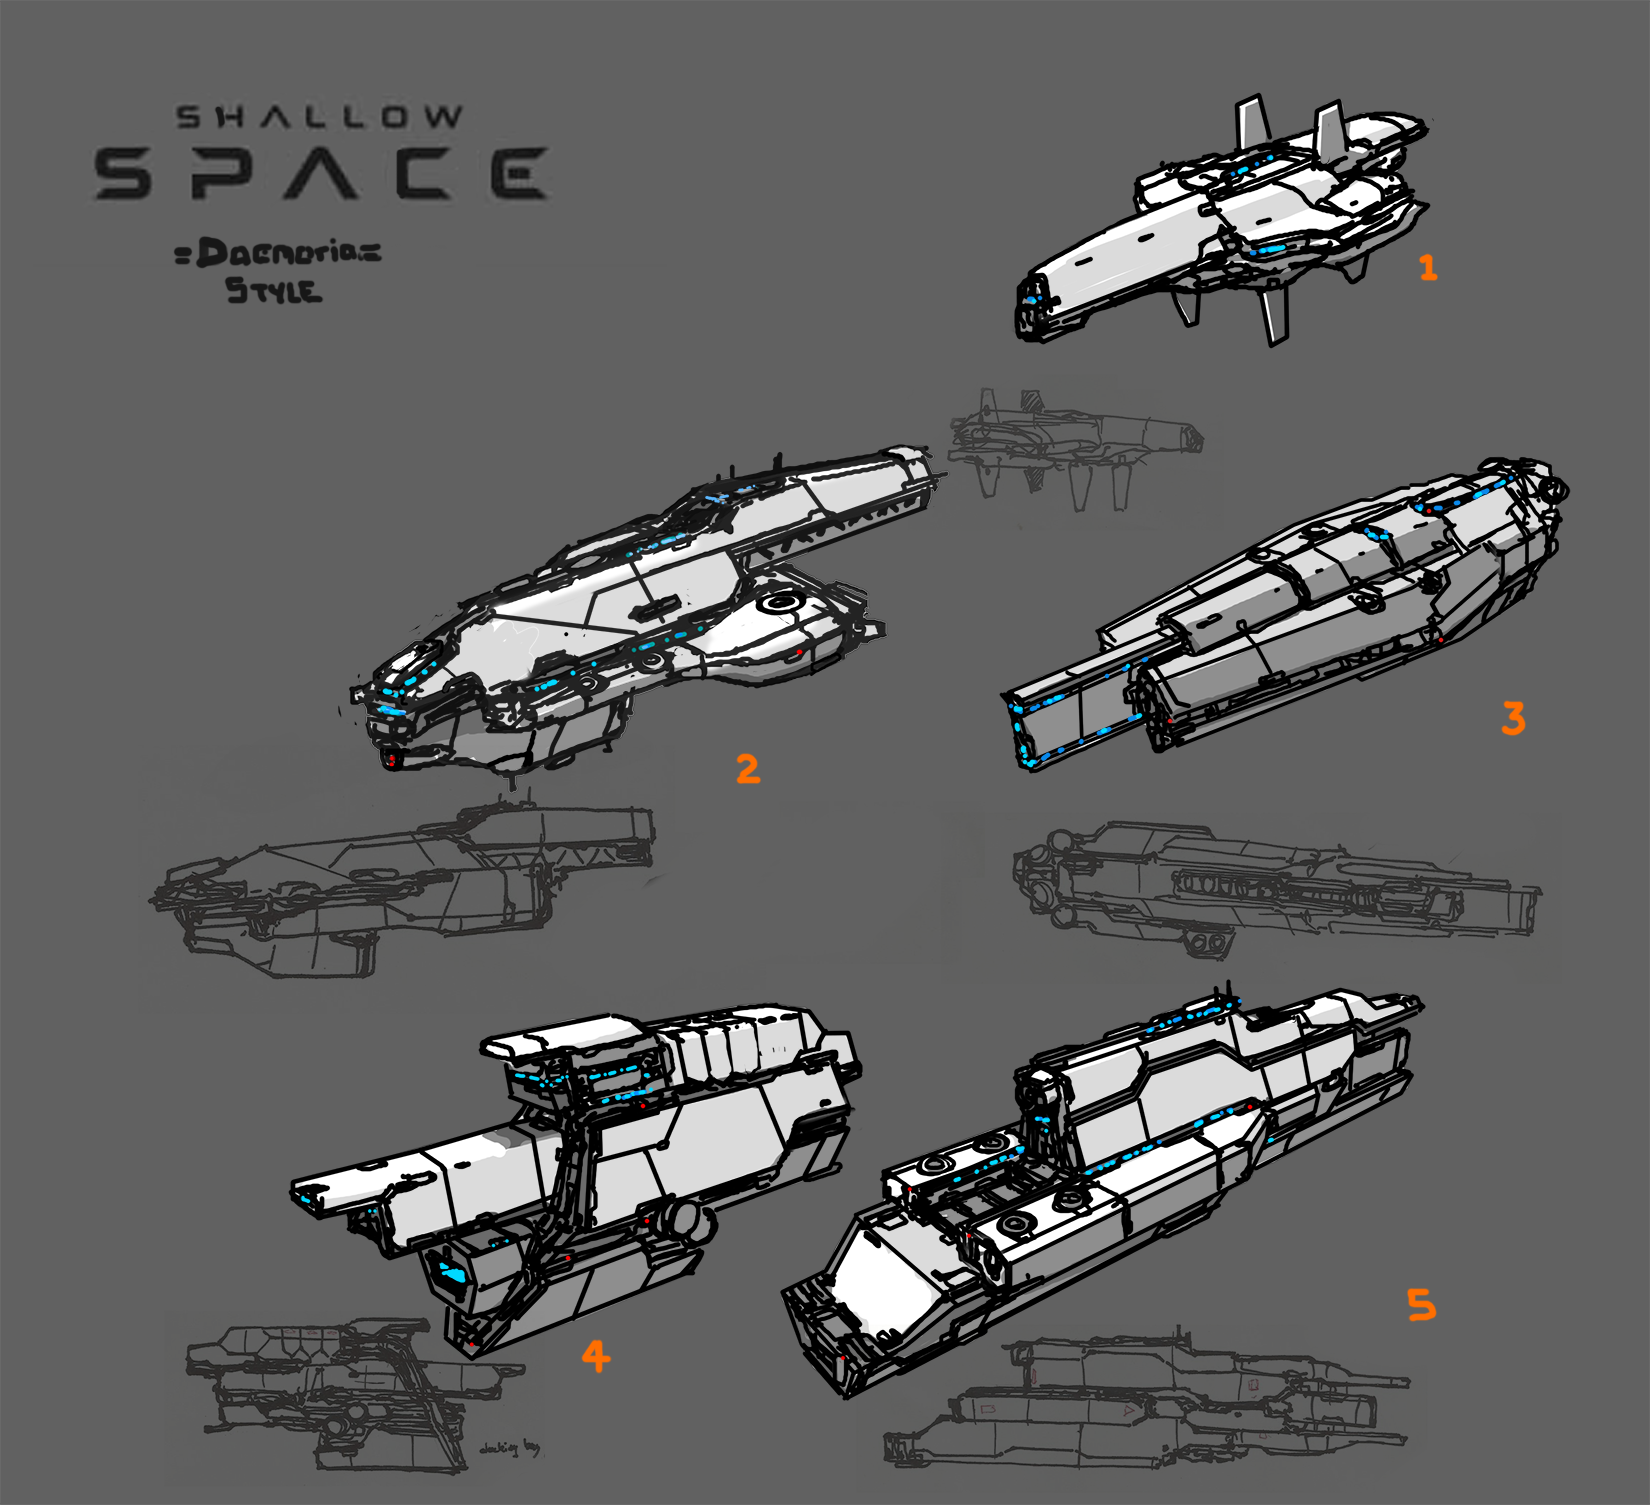 Commission - Warship designs by Daemoria on DeviantArt